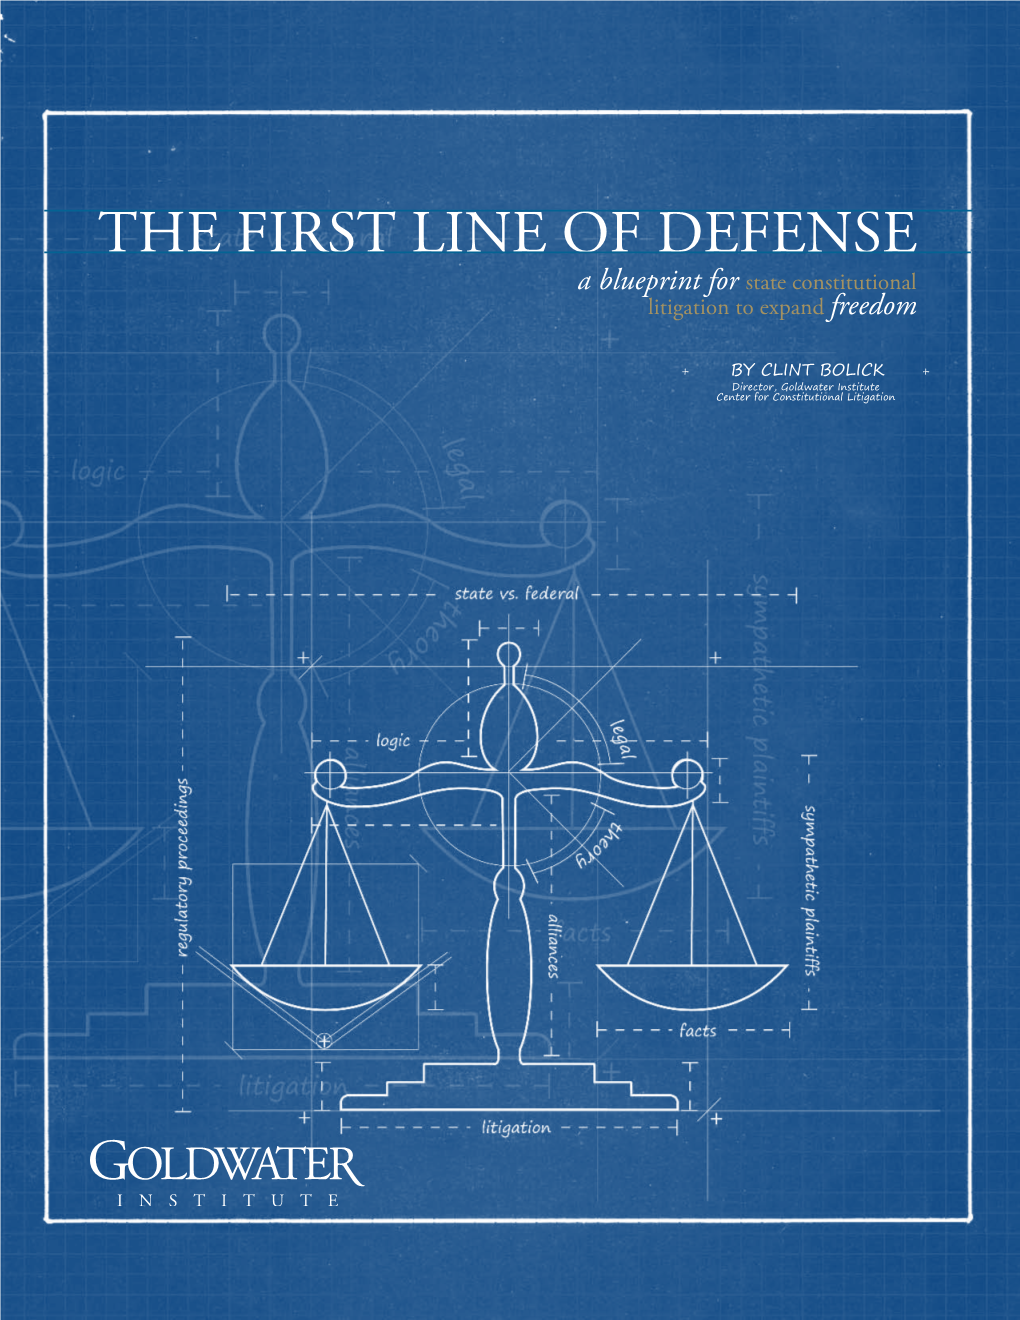 THE FIRST LINE of DEFENSE a Blueprint for State Constitutional Litigation to Expand Freedom